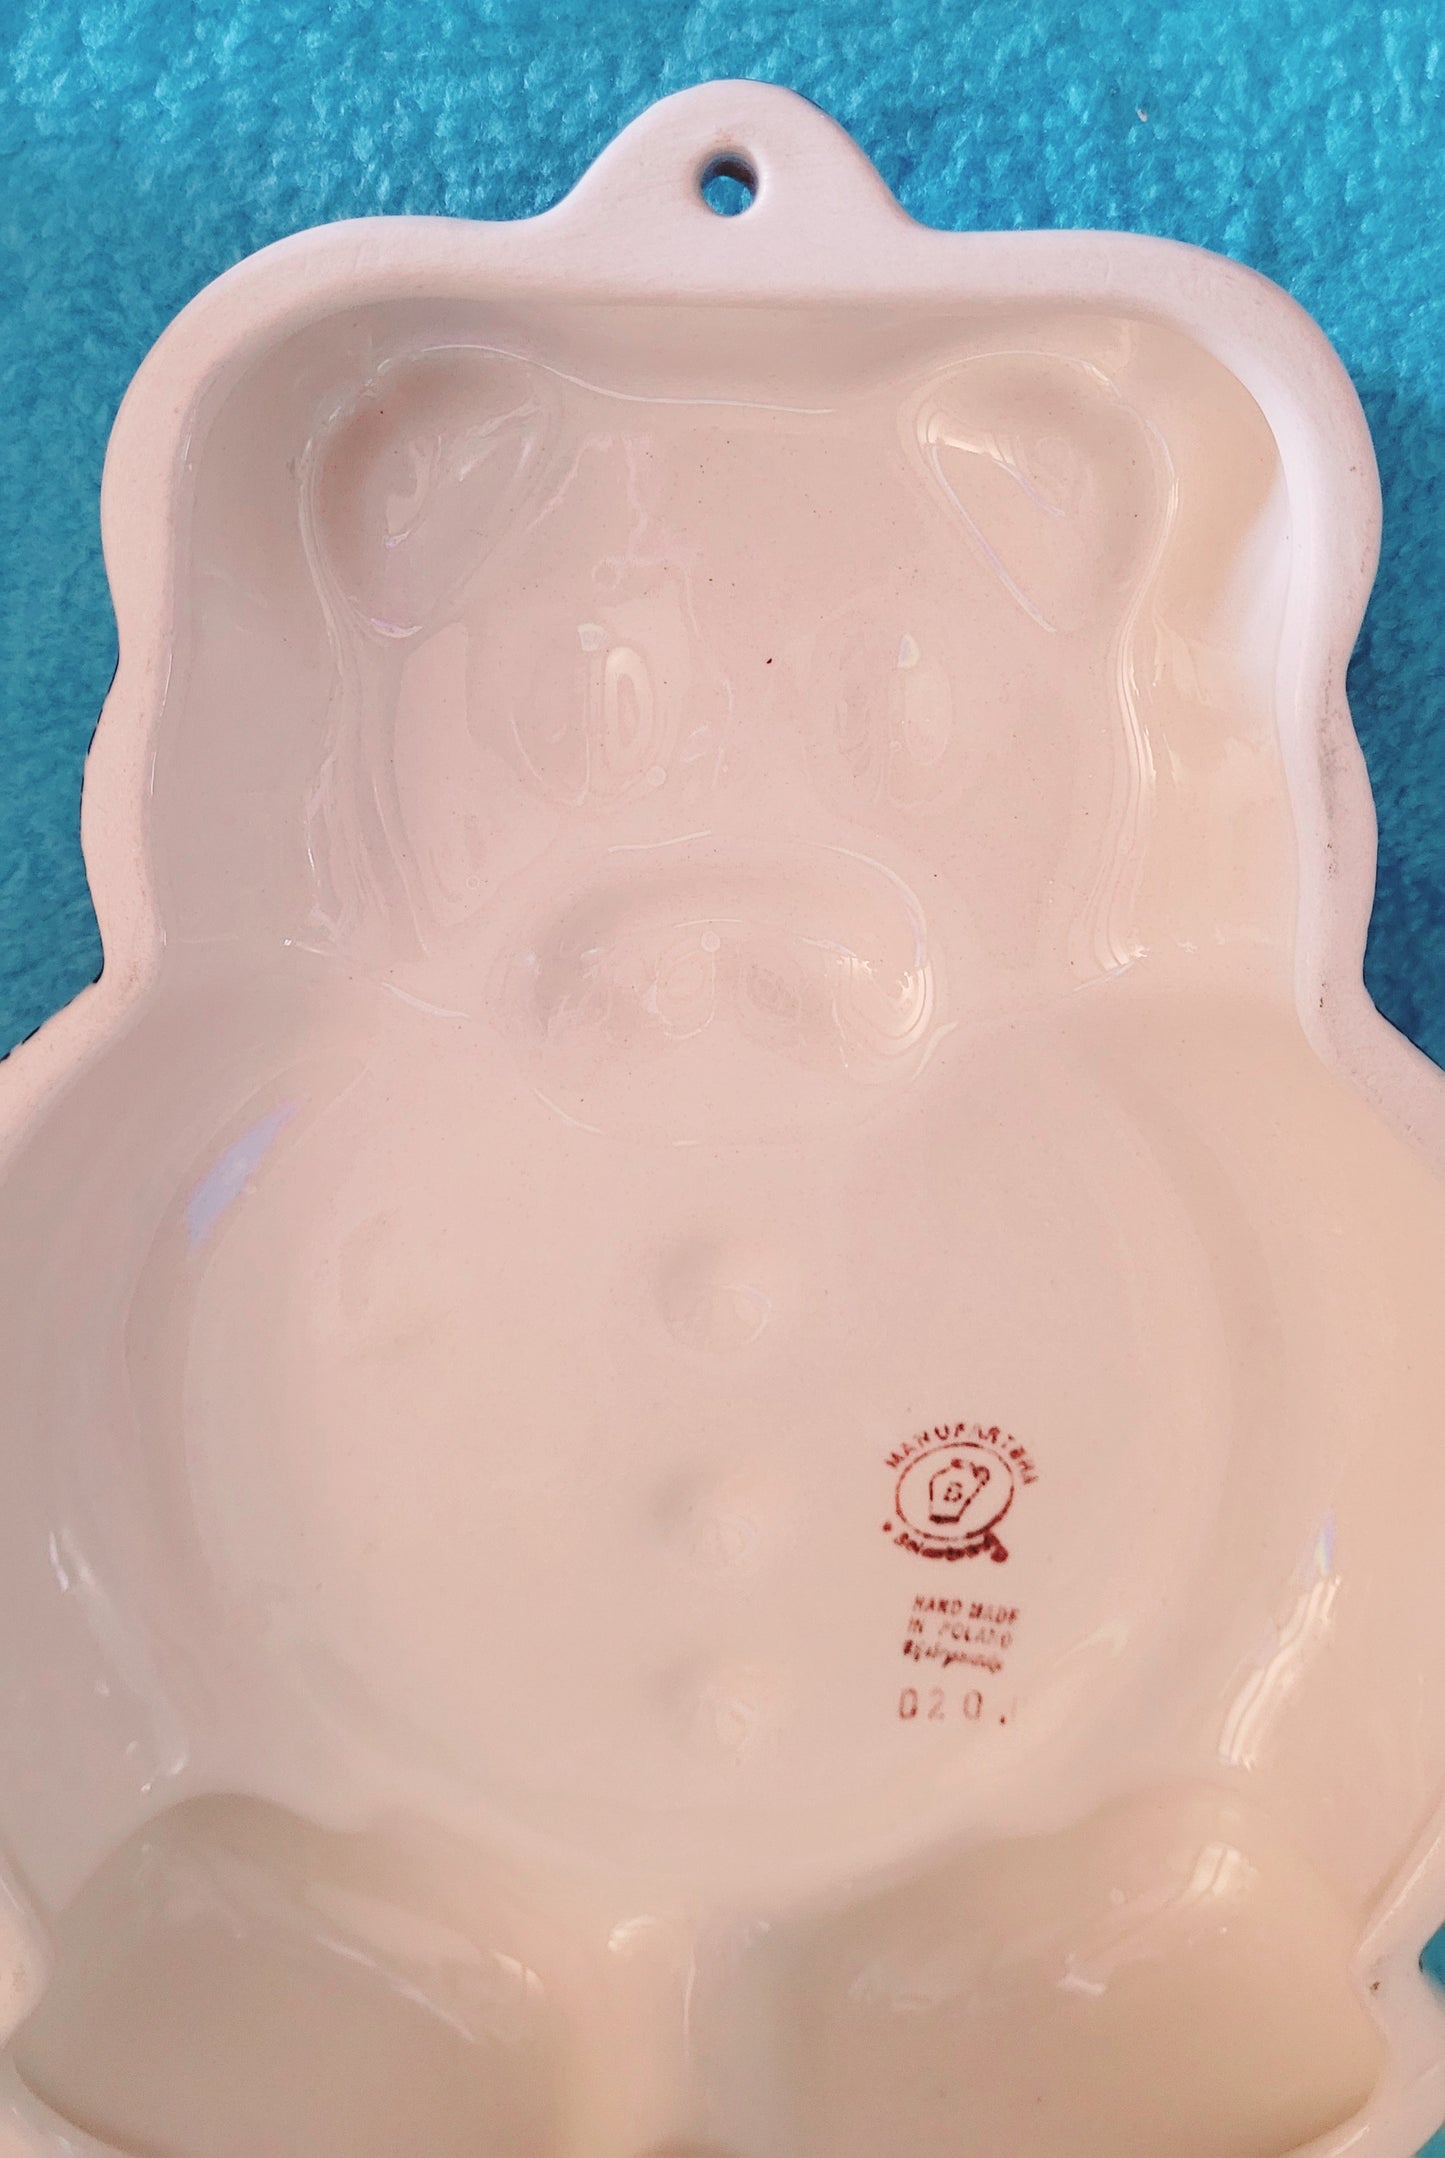 Vintage 'White & Blue' Teddy Bear Mold Wall Hanging by Poland